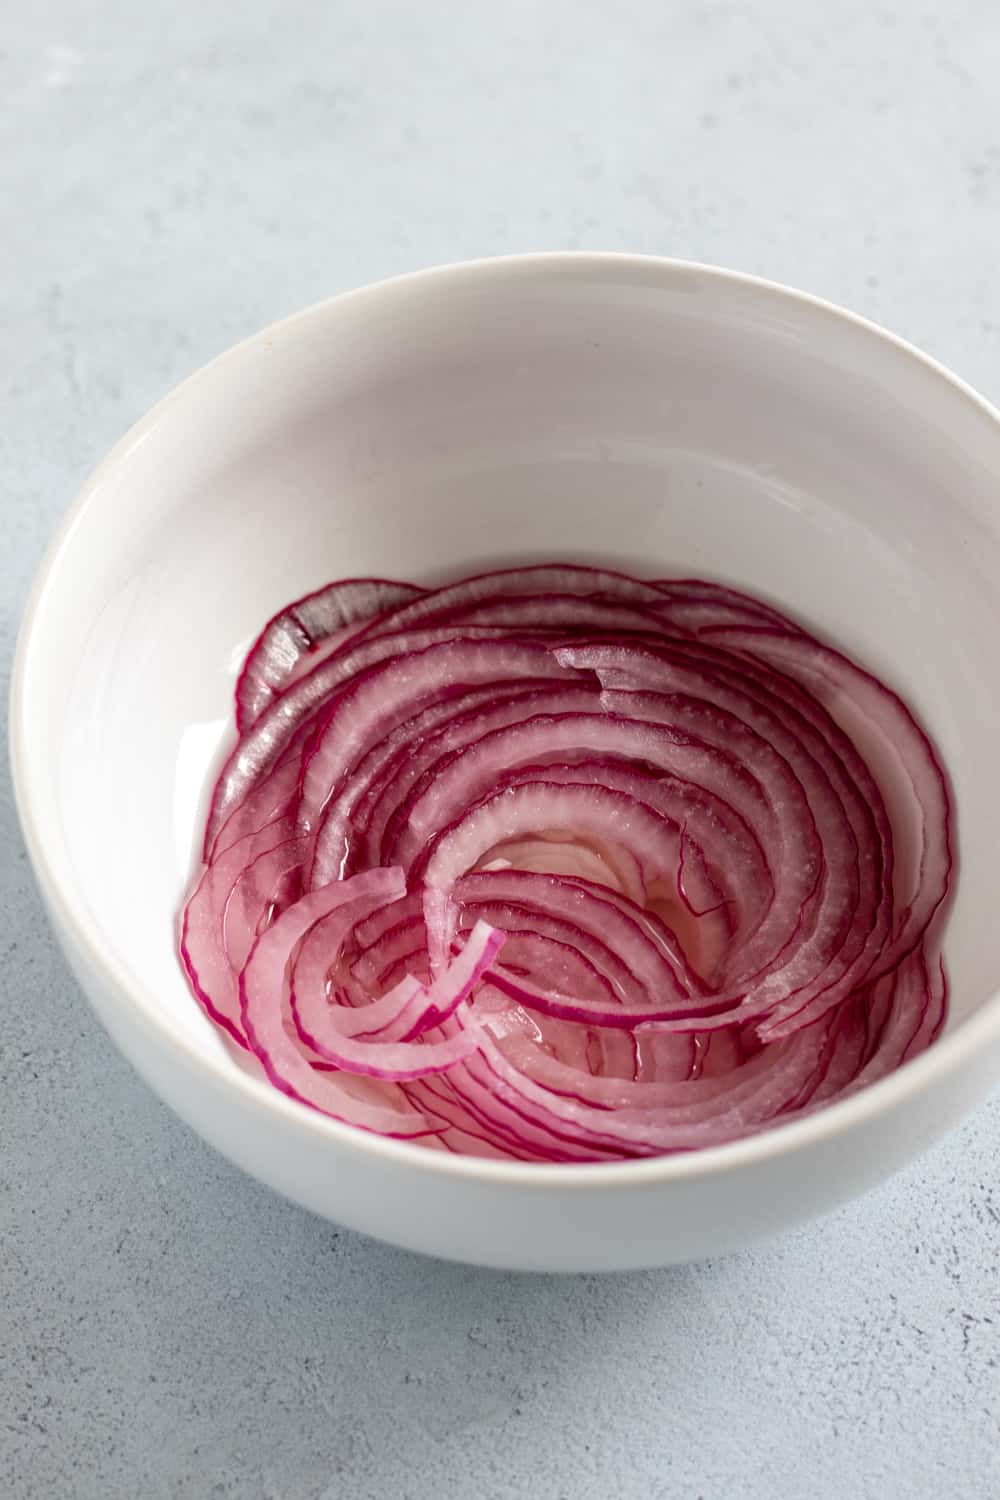 thinly sliced red onion marinating in rice vinegar - quick pickled onions.